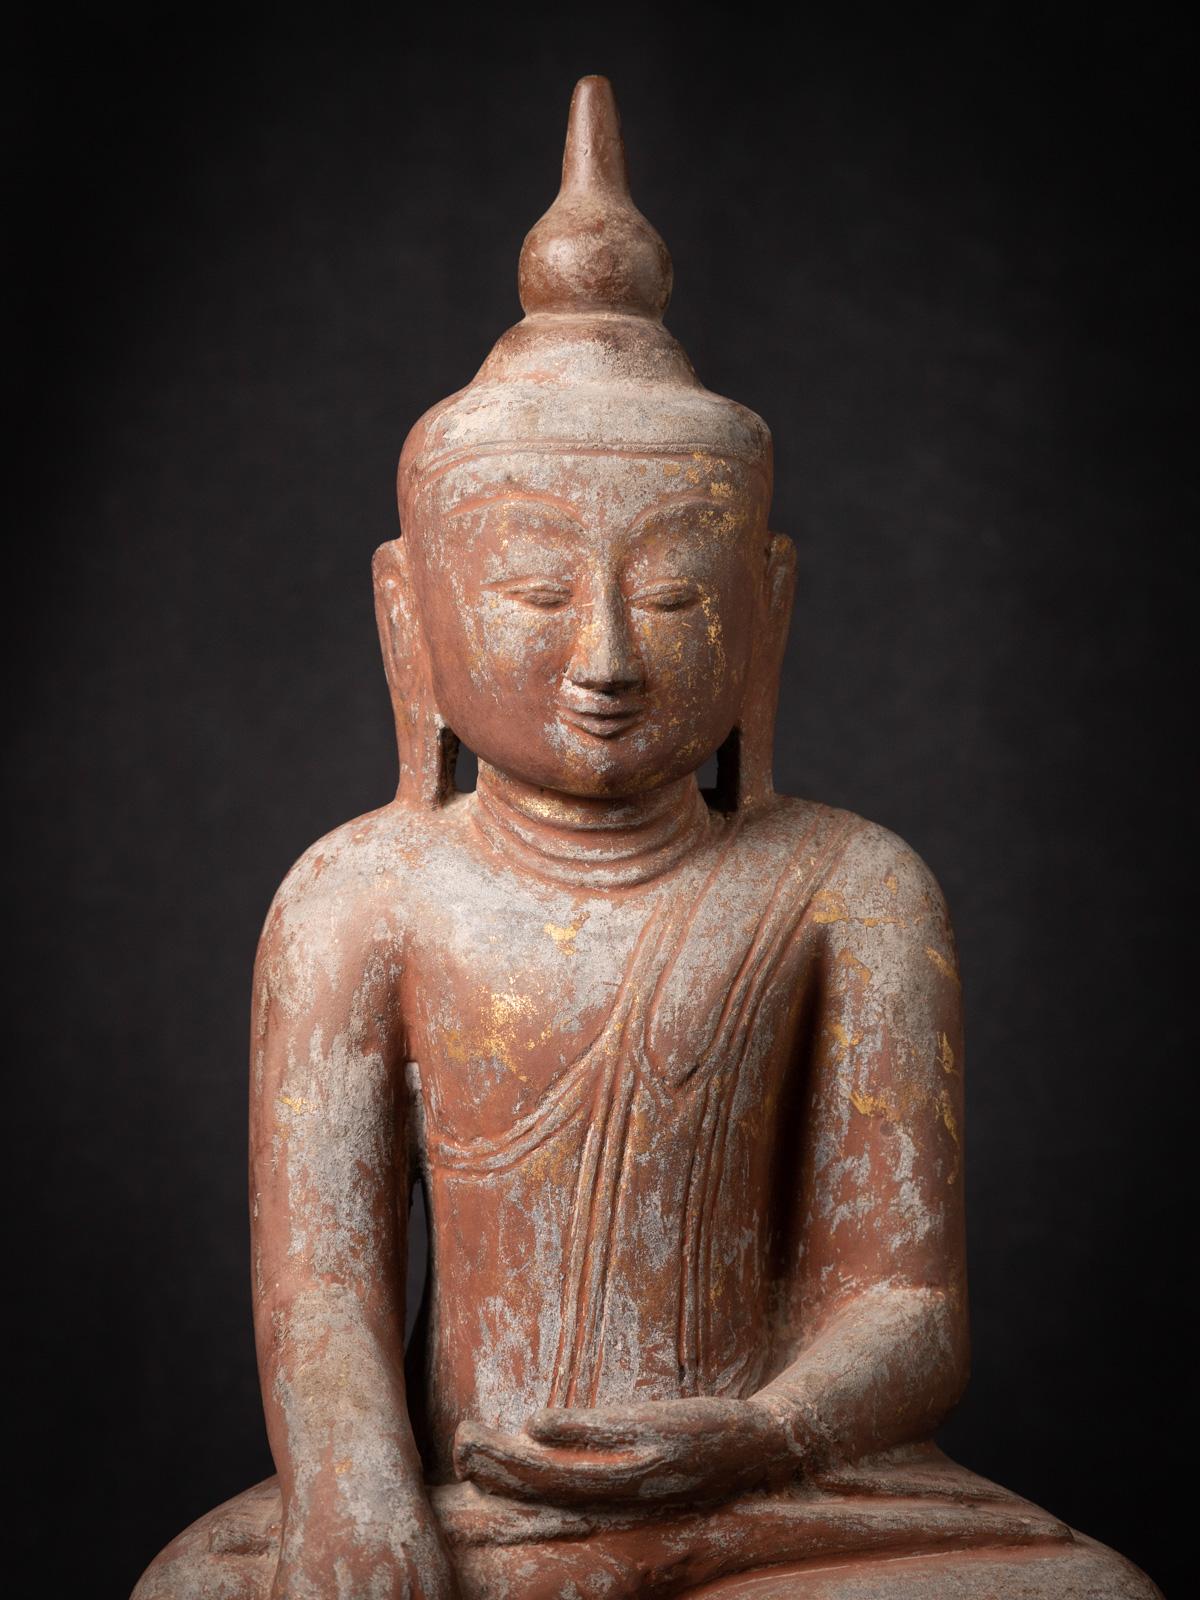 Exquisite 18th Century Burmese Sandstone Buddha Statue with Shan Tai Yai Style For Sale 4